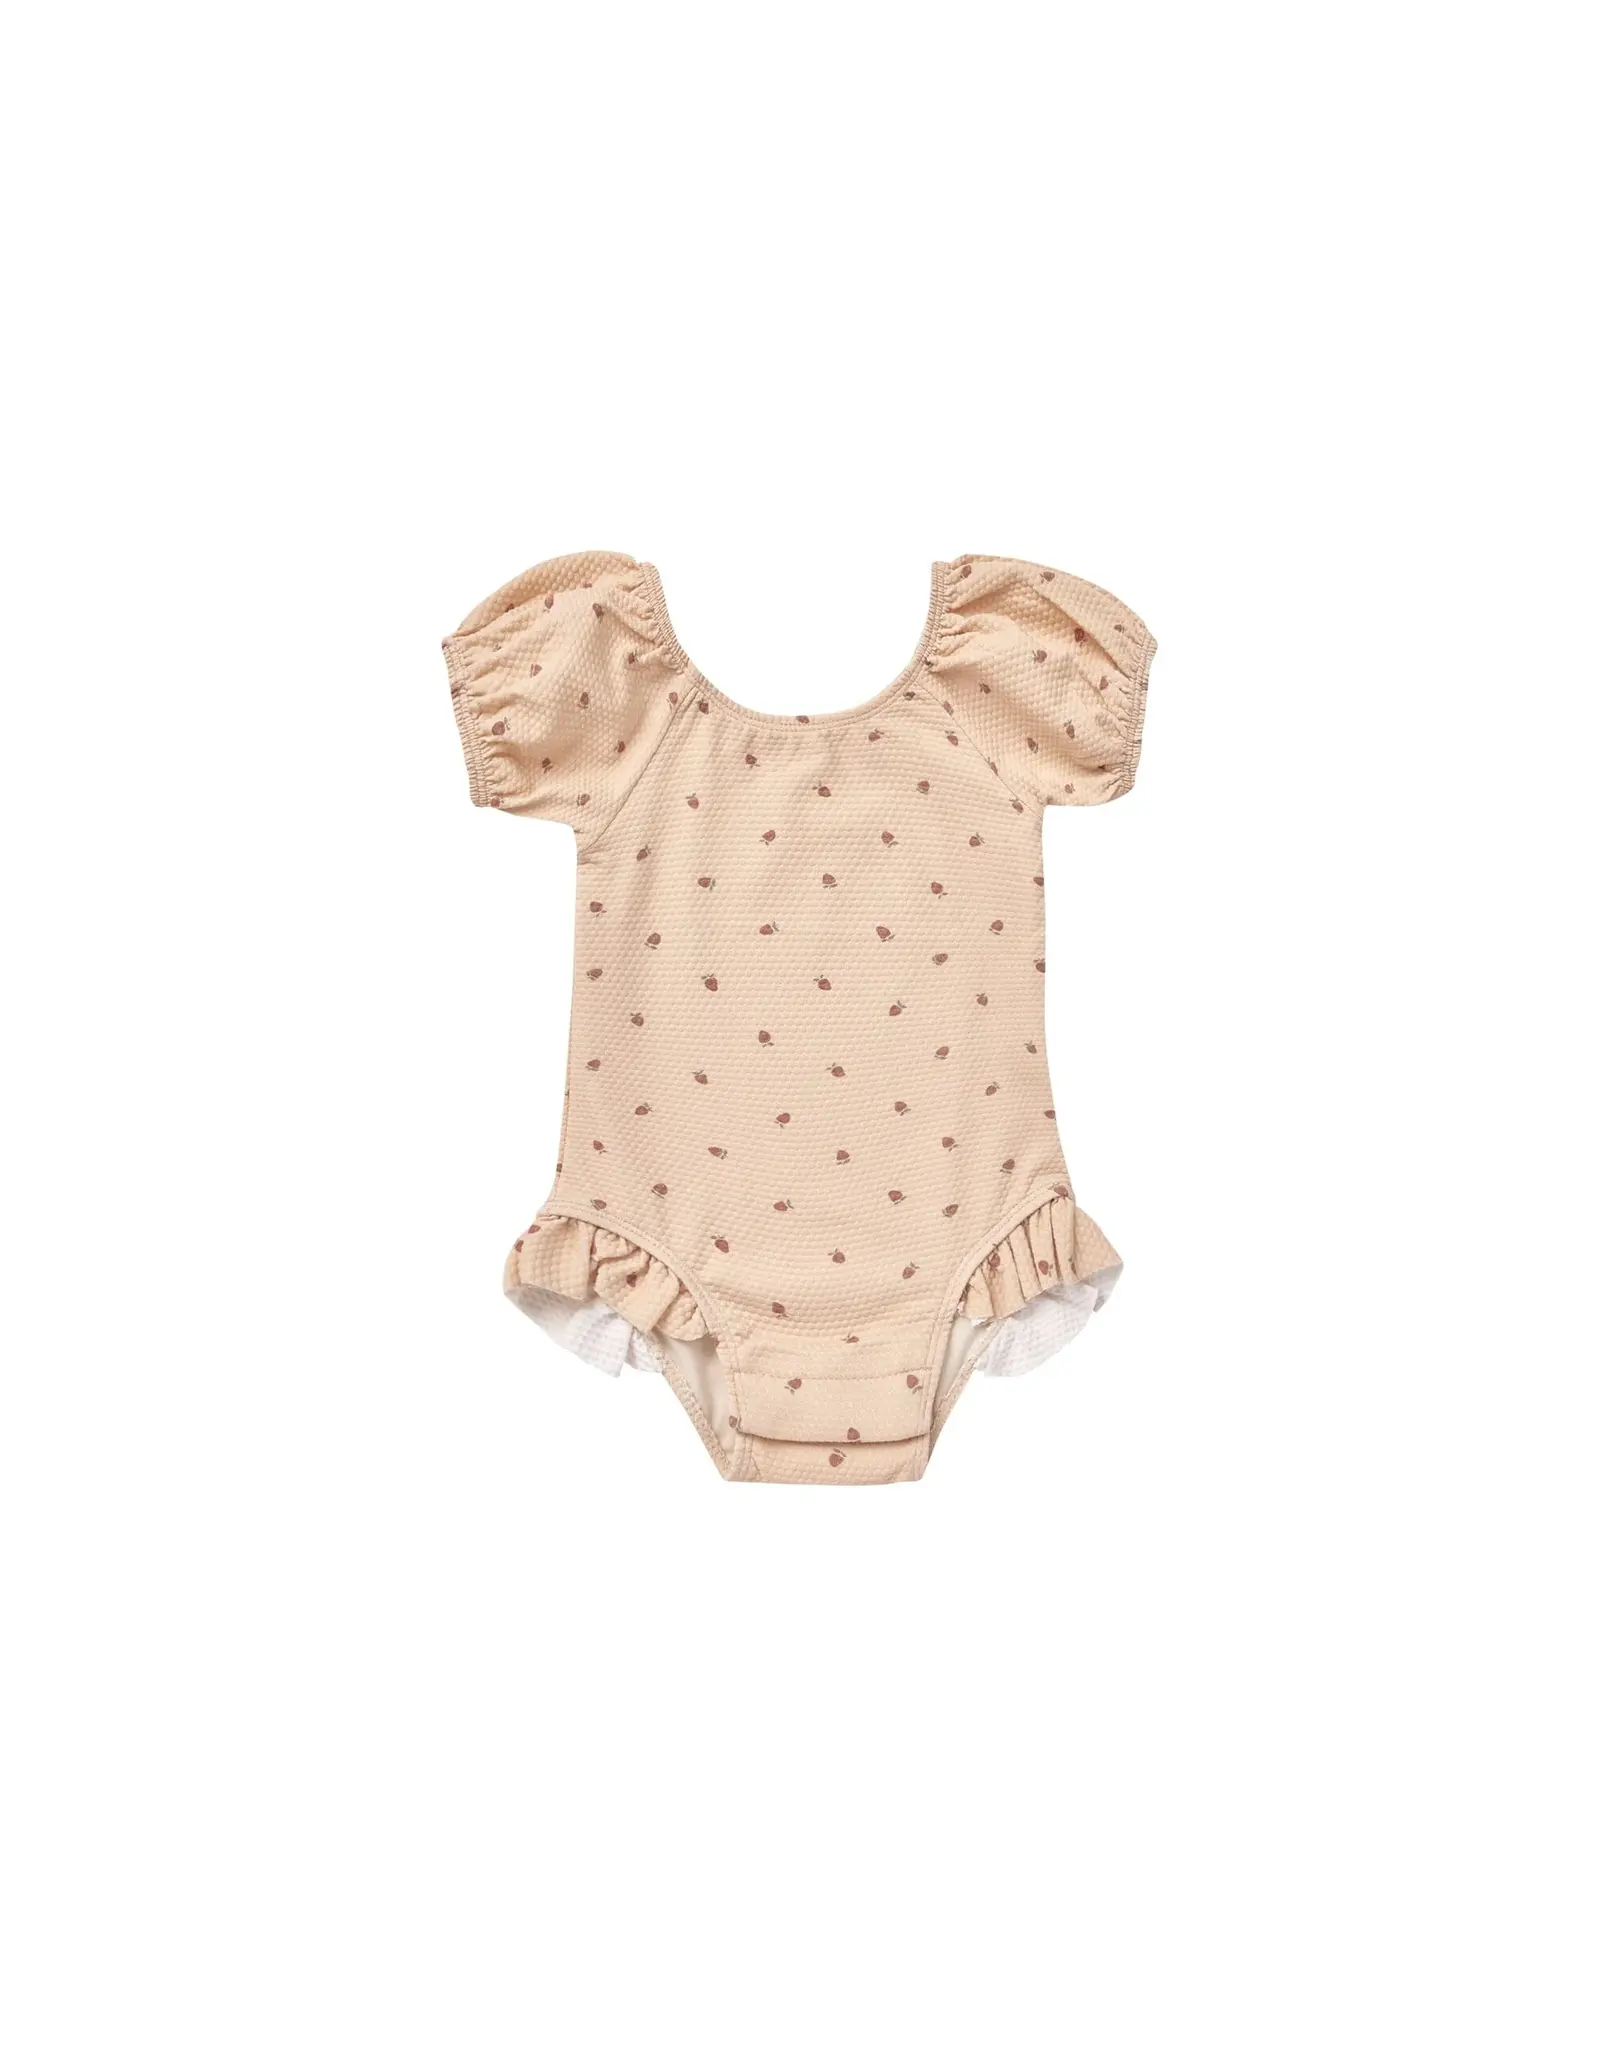 QuincyMae 18-24MO: Catalina One-Piece Swimsuit - Strawberries